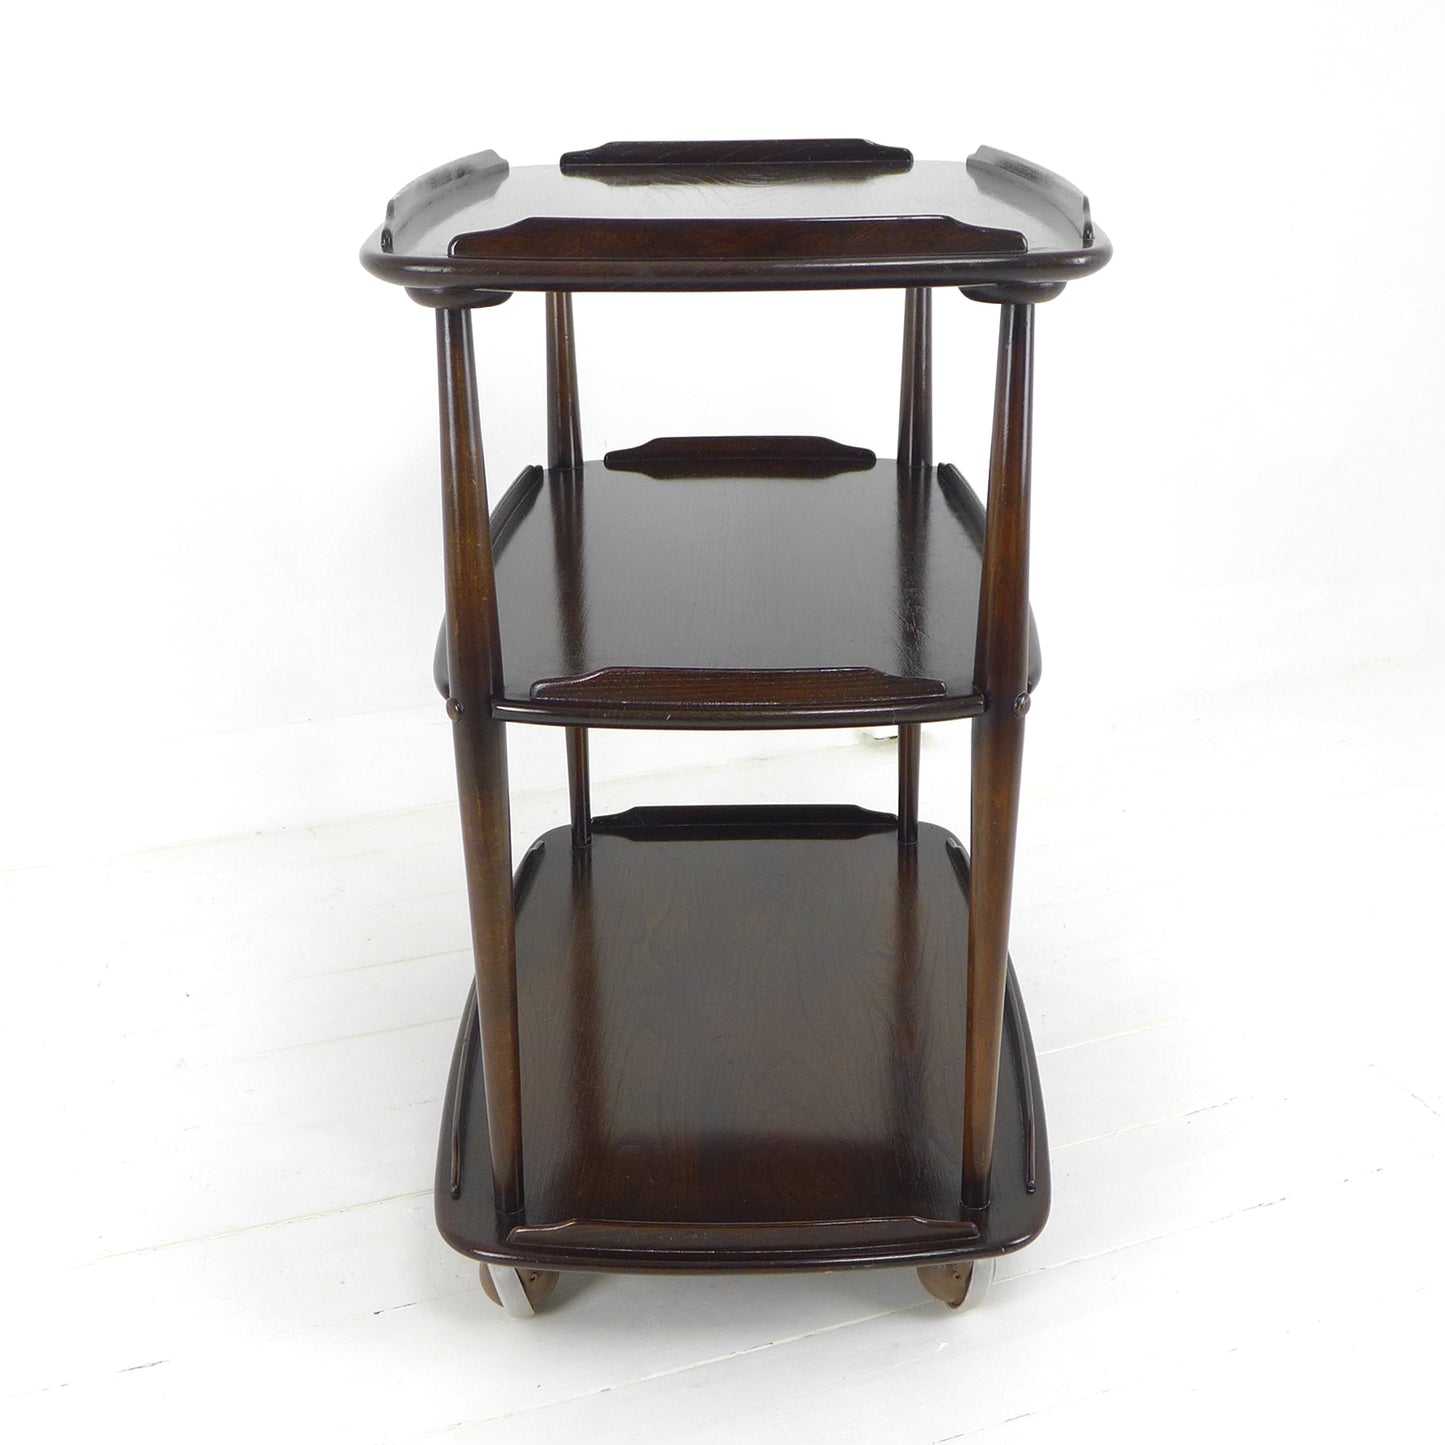 Vintage ERCOL Drinks Trolley / Bar Cart / Record Player Stand Table Mid Century